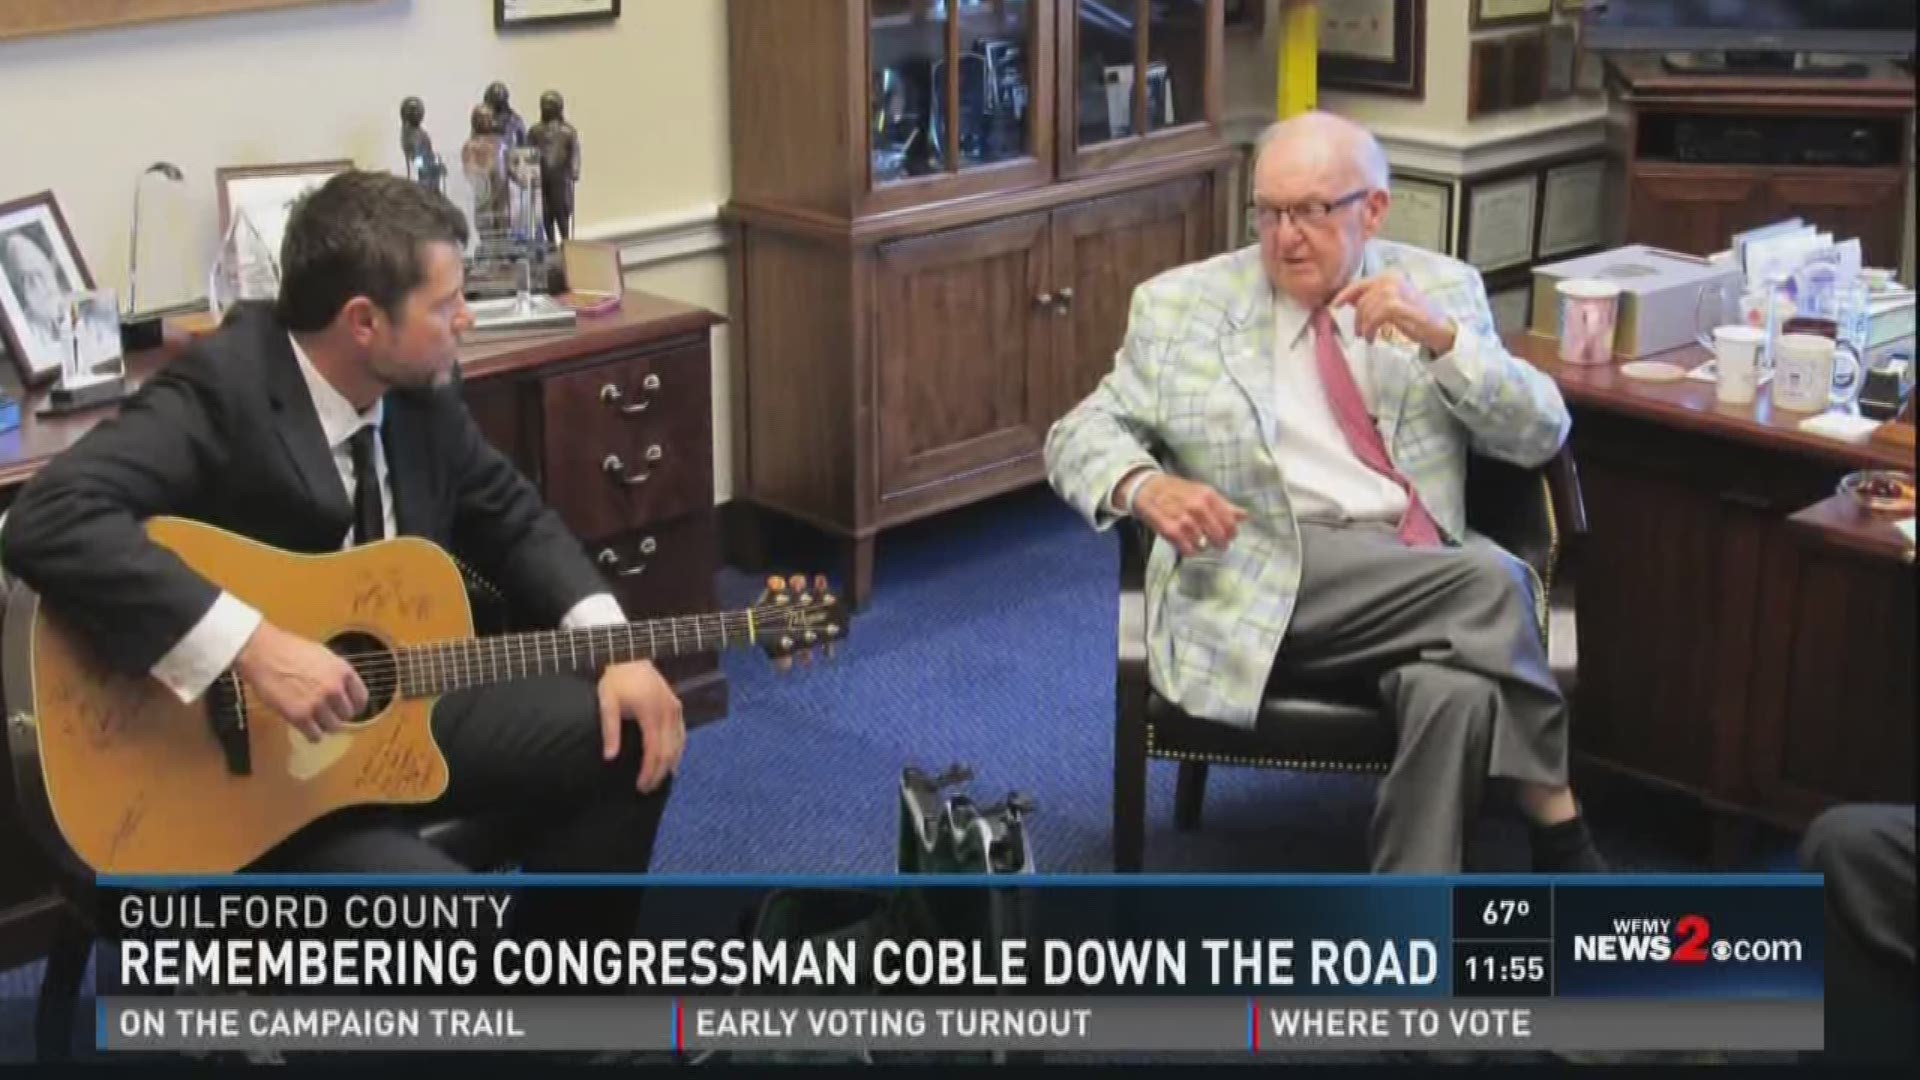 Honoring Howard Coble Down the Road